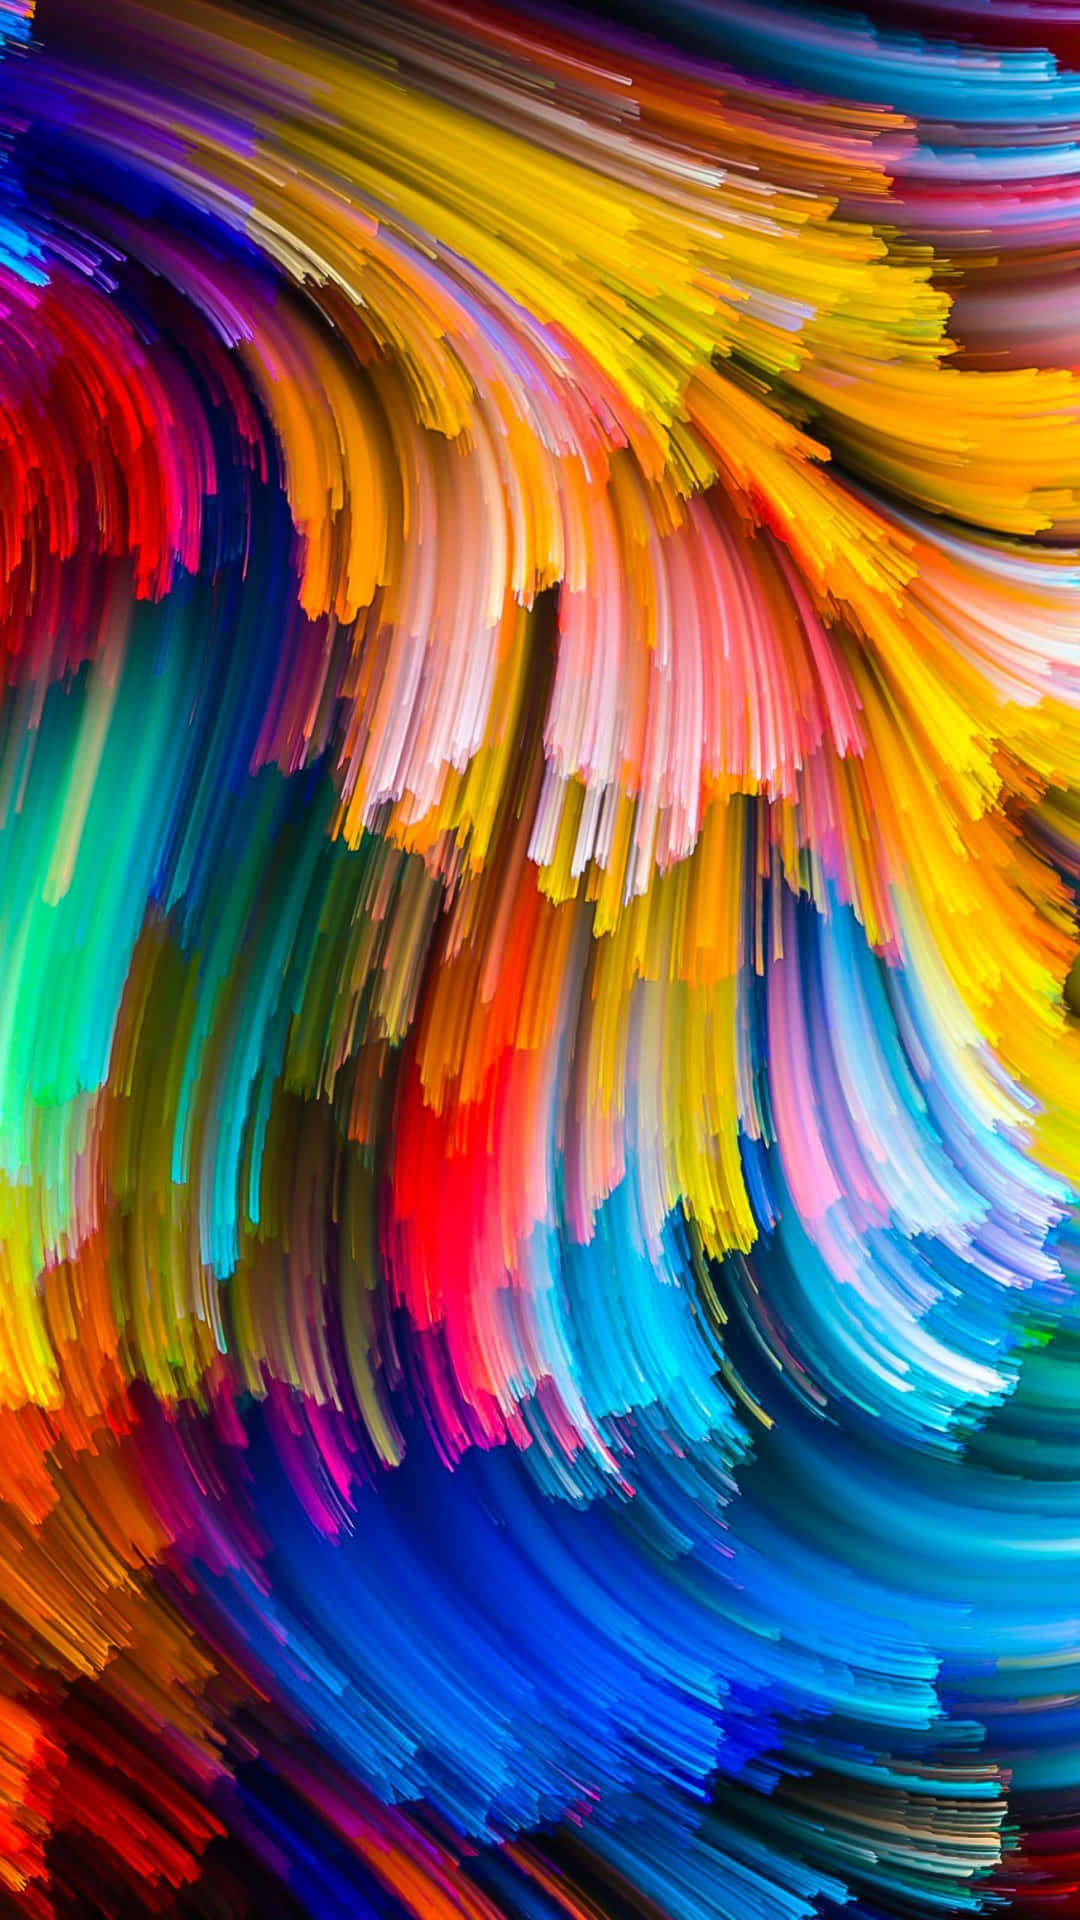 Caption: Abstract Rainbow Colored Smartphone Wallpaper Wallpaper